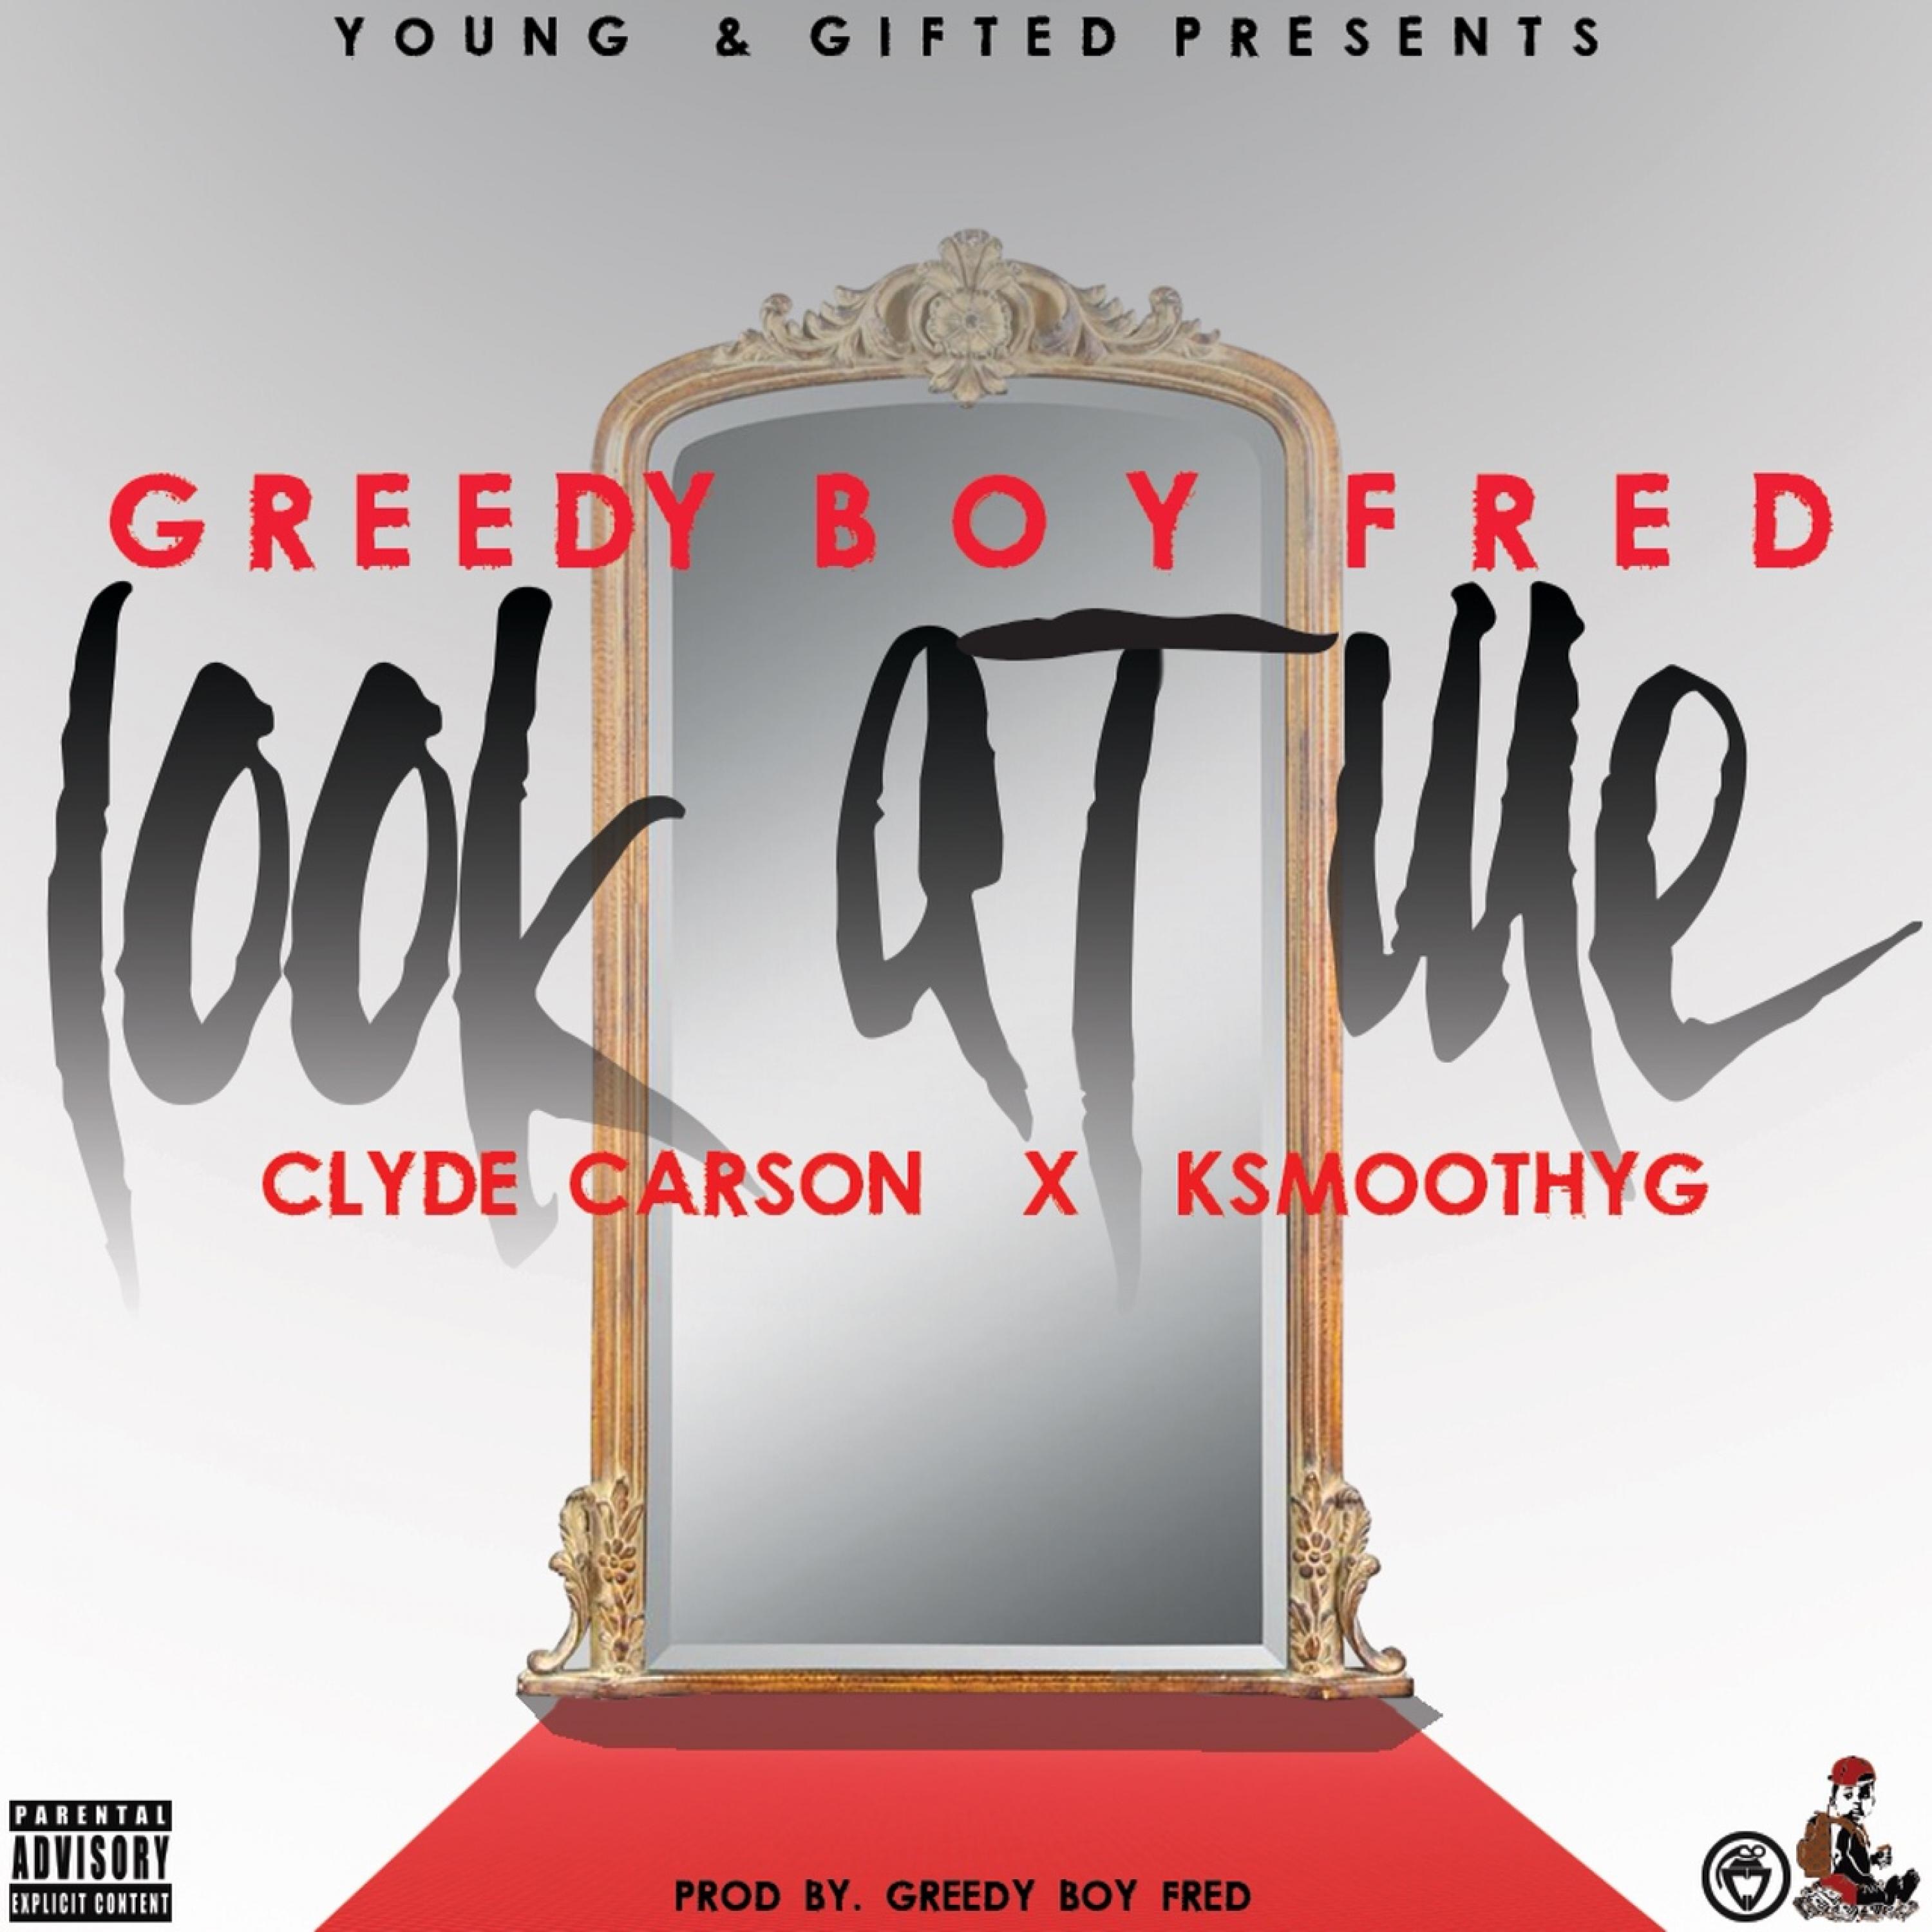 Look At Me (feat. Clyde Carson & KSmoothYG)